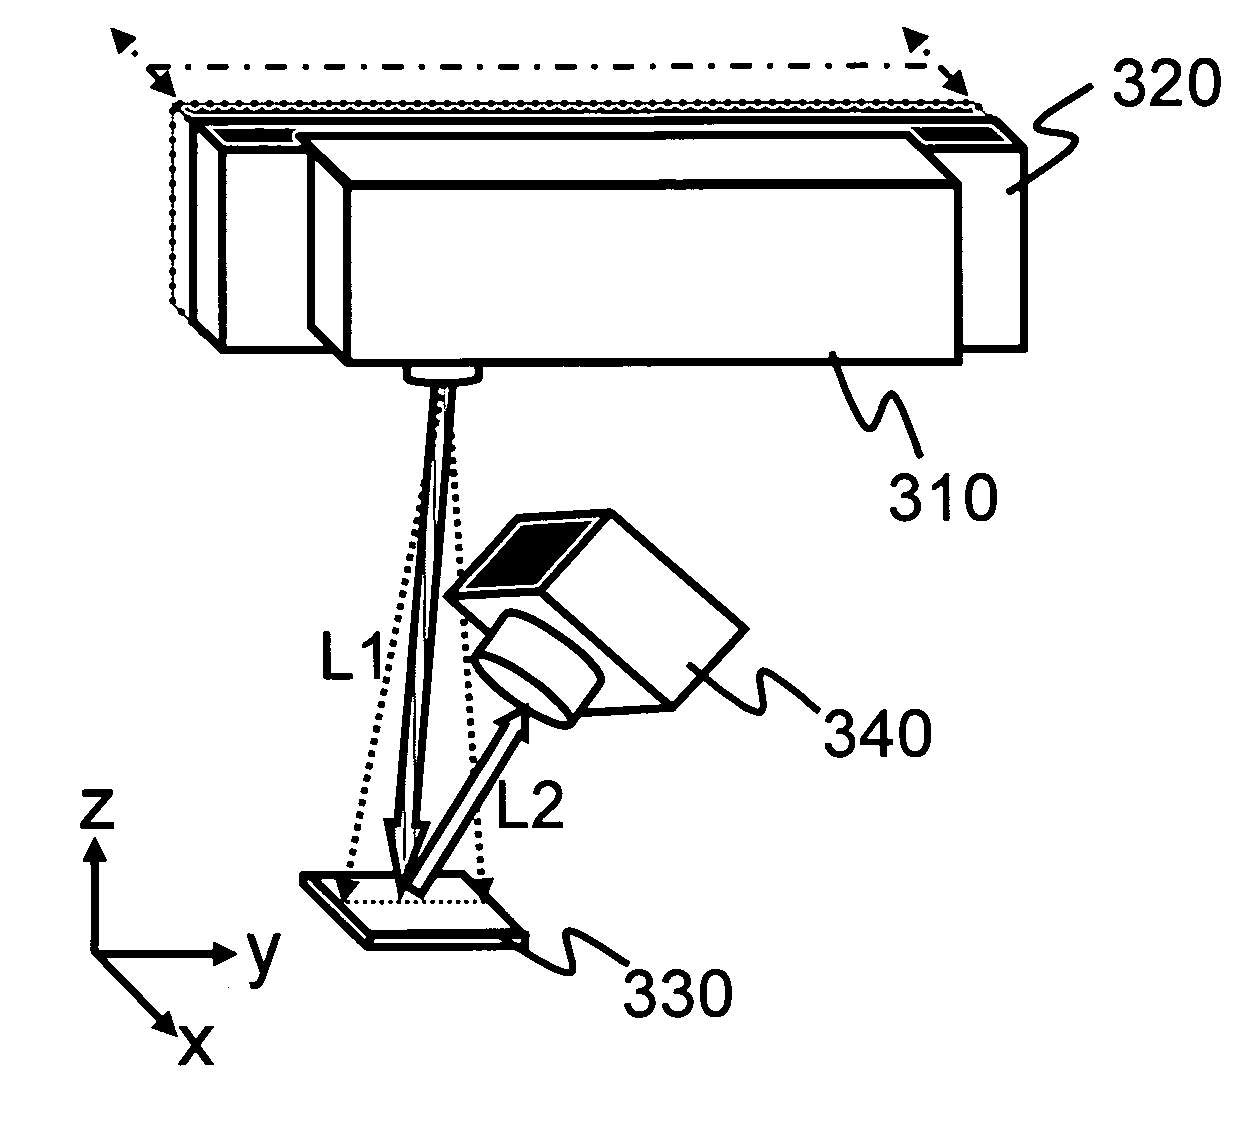 Optical detection apparatus and method thereof